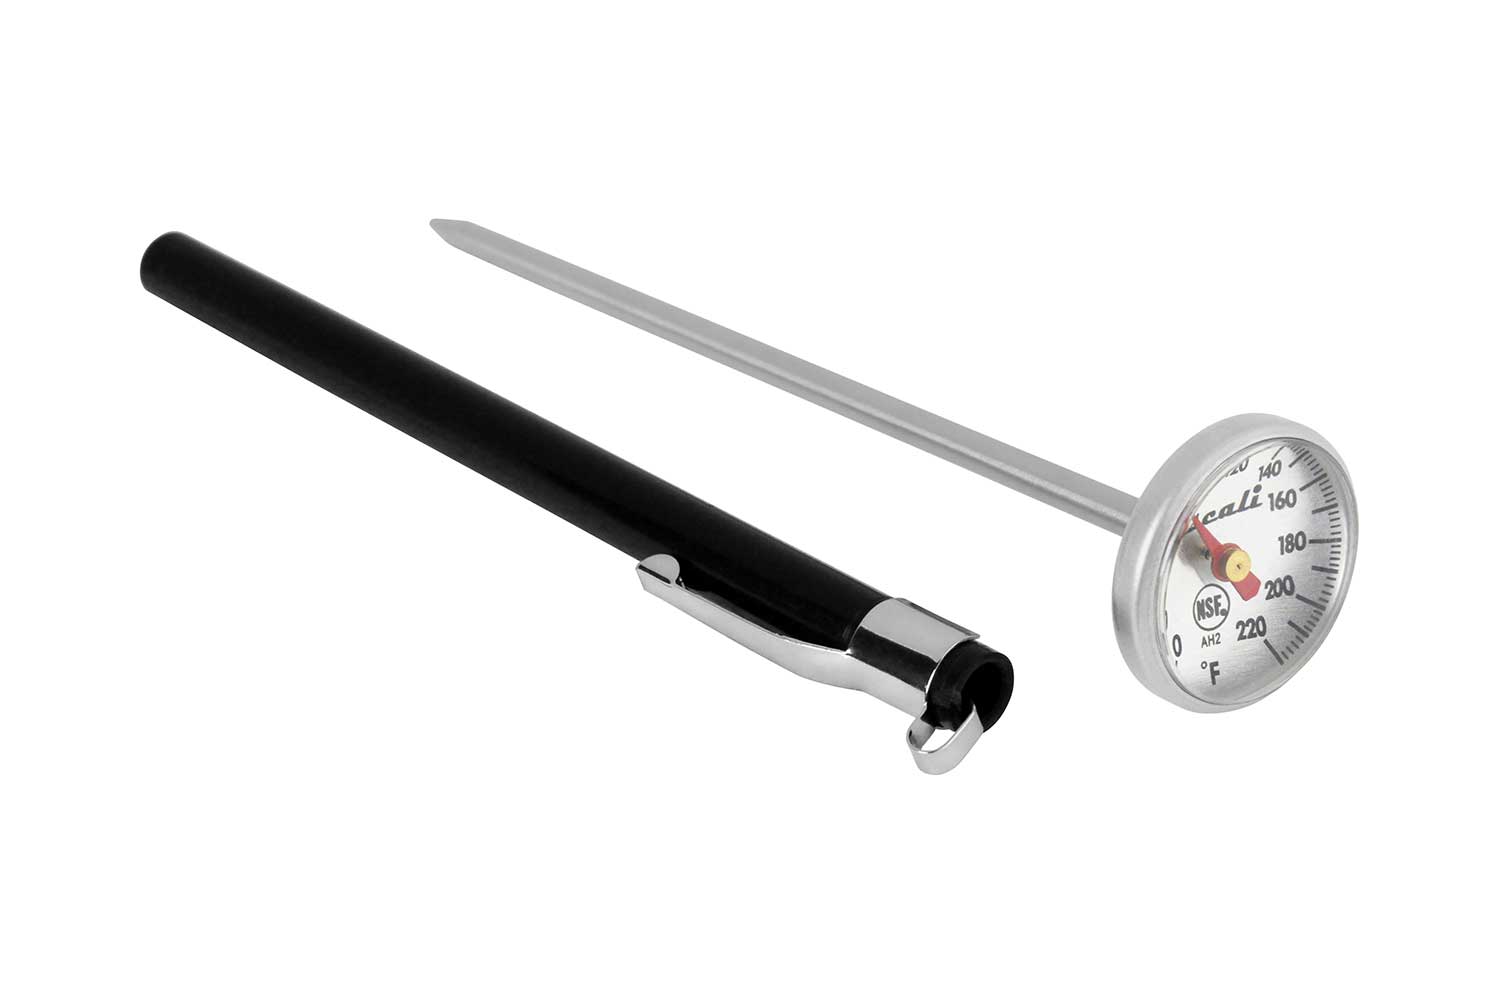 escali ah2 instant read dial thermometer